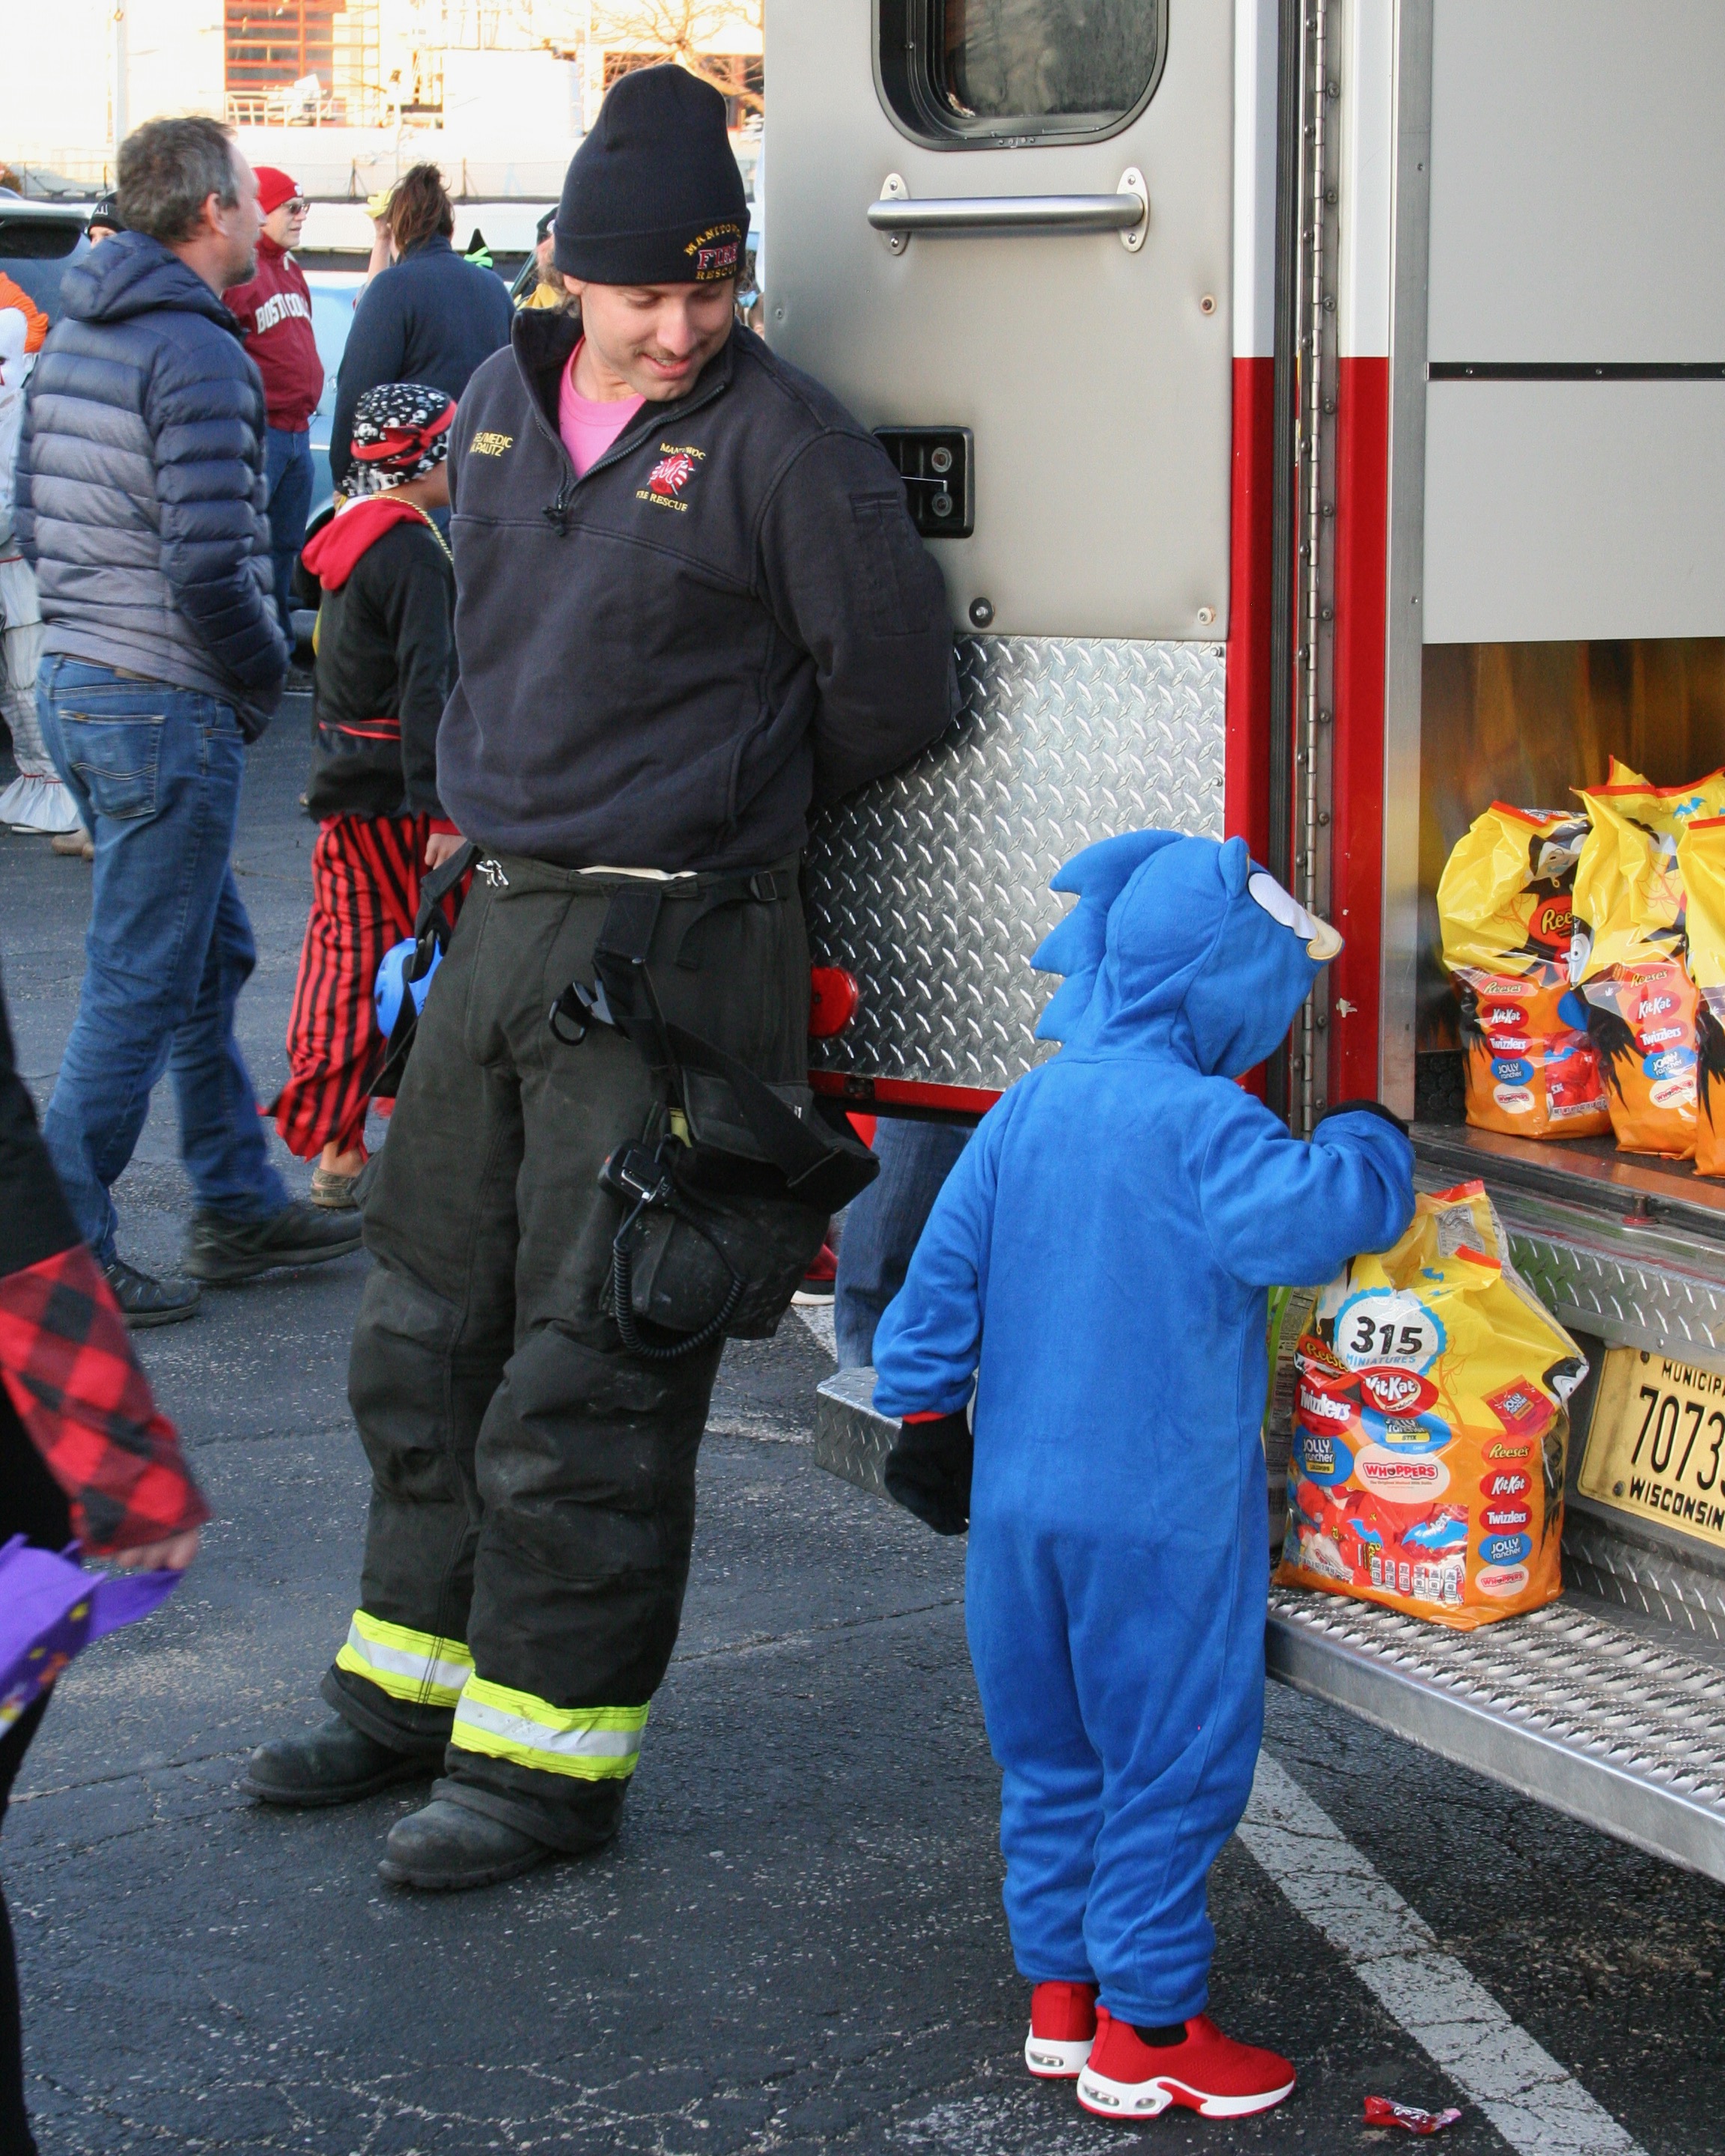 Costumed child getting treats from fire truck